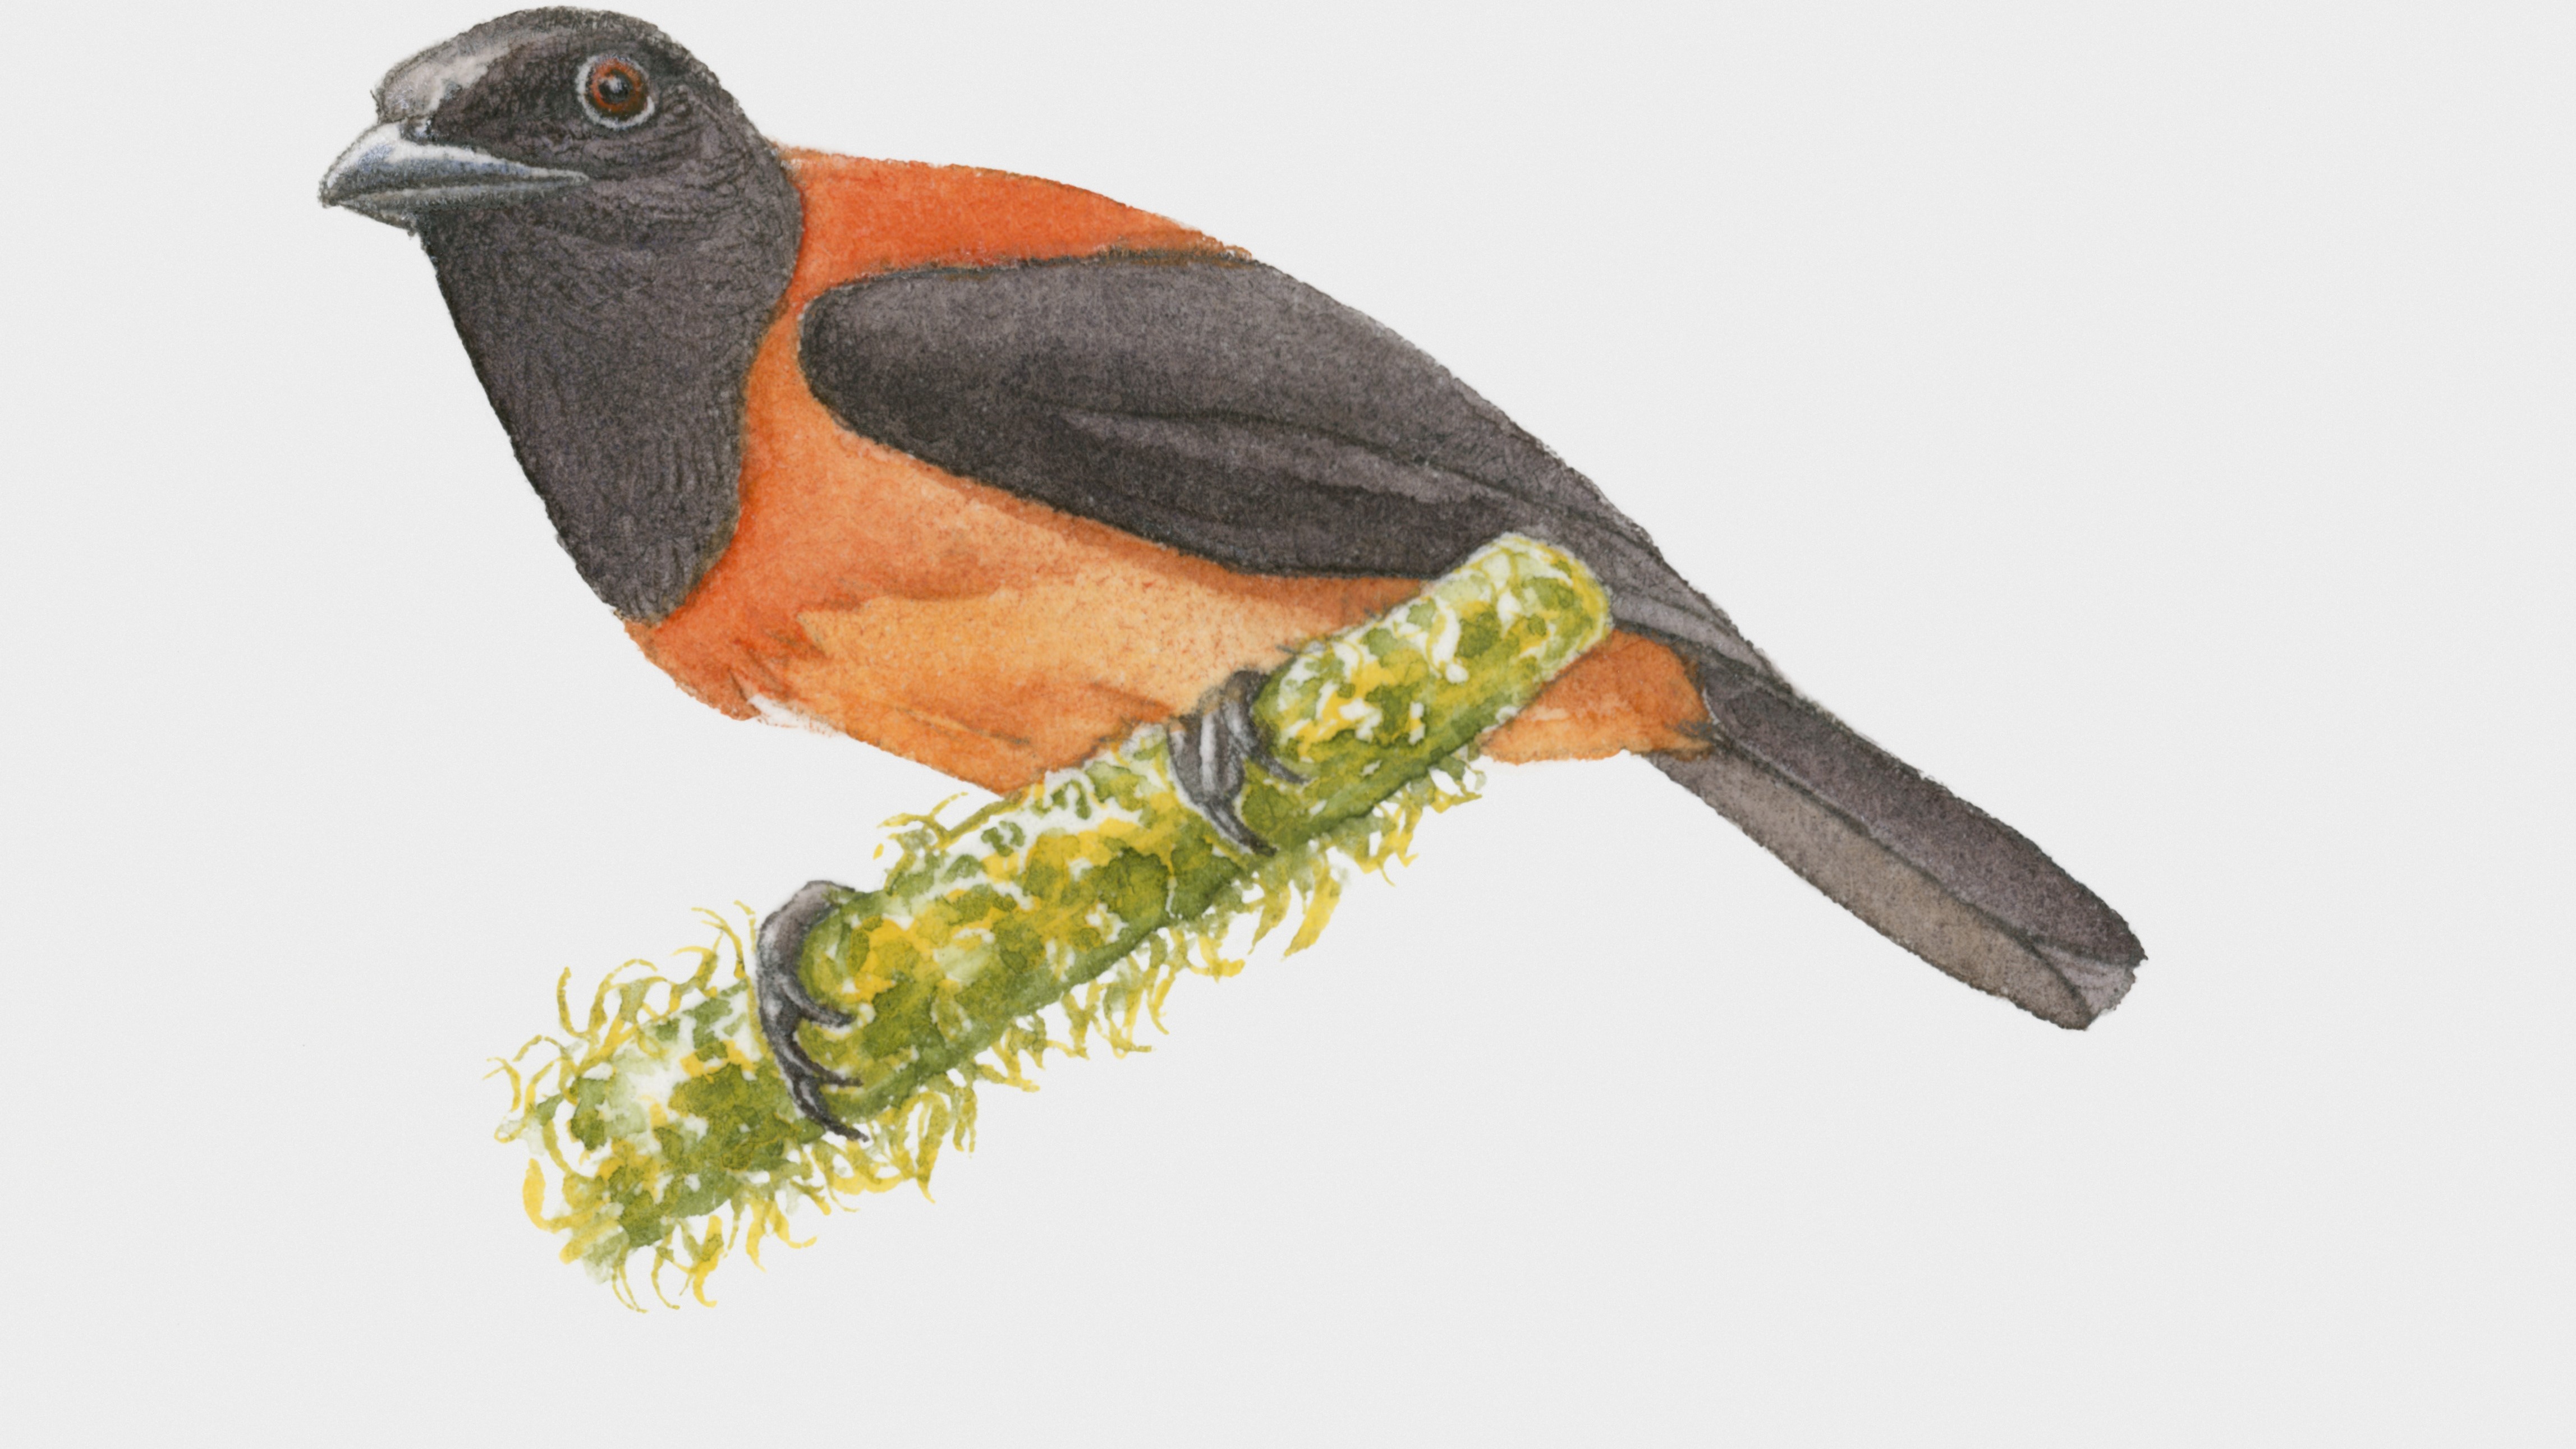 Hooded pitohui (Pitohui dichrous) perched on a branch.